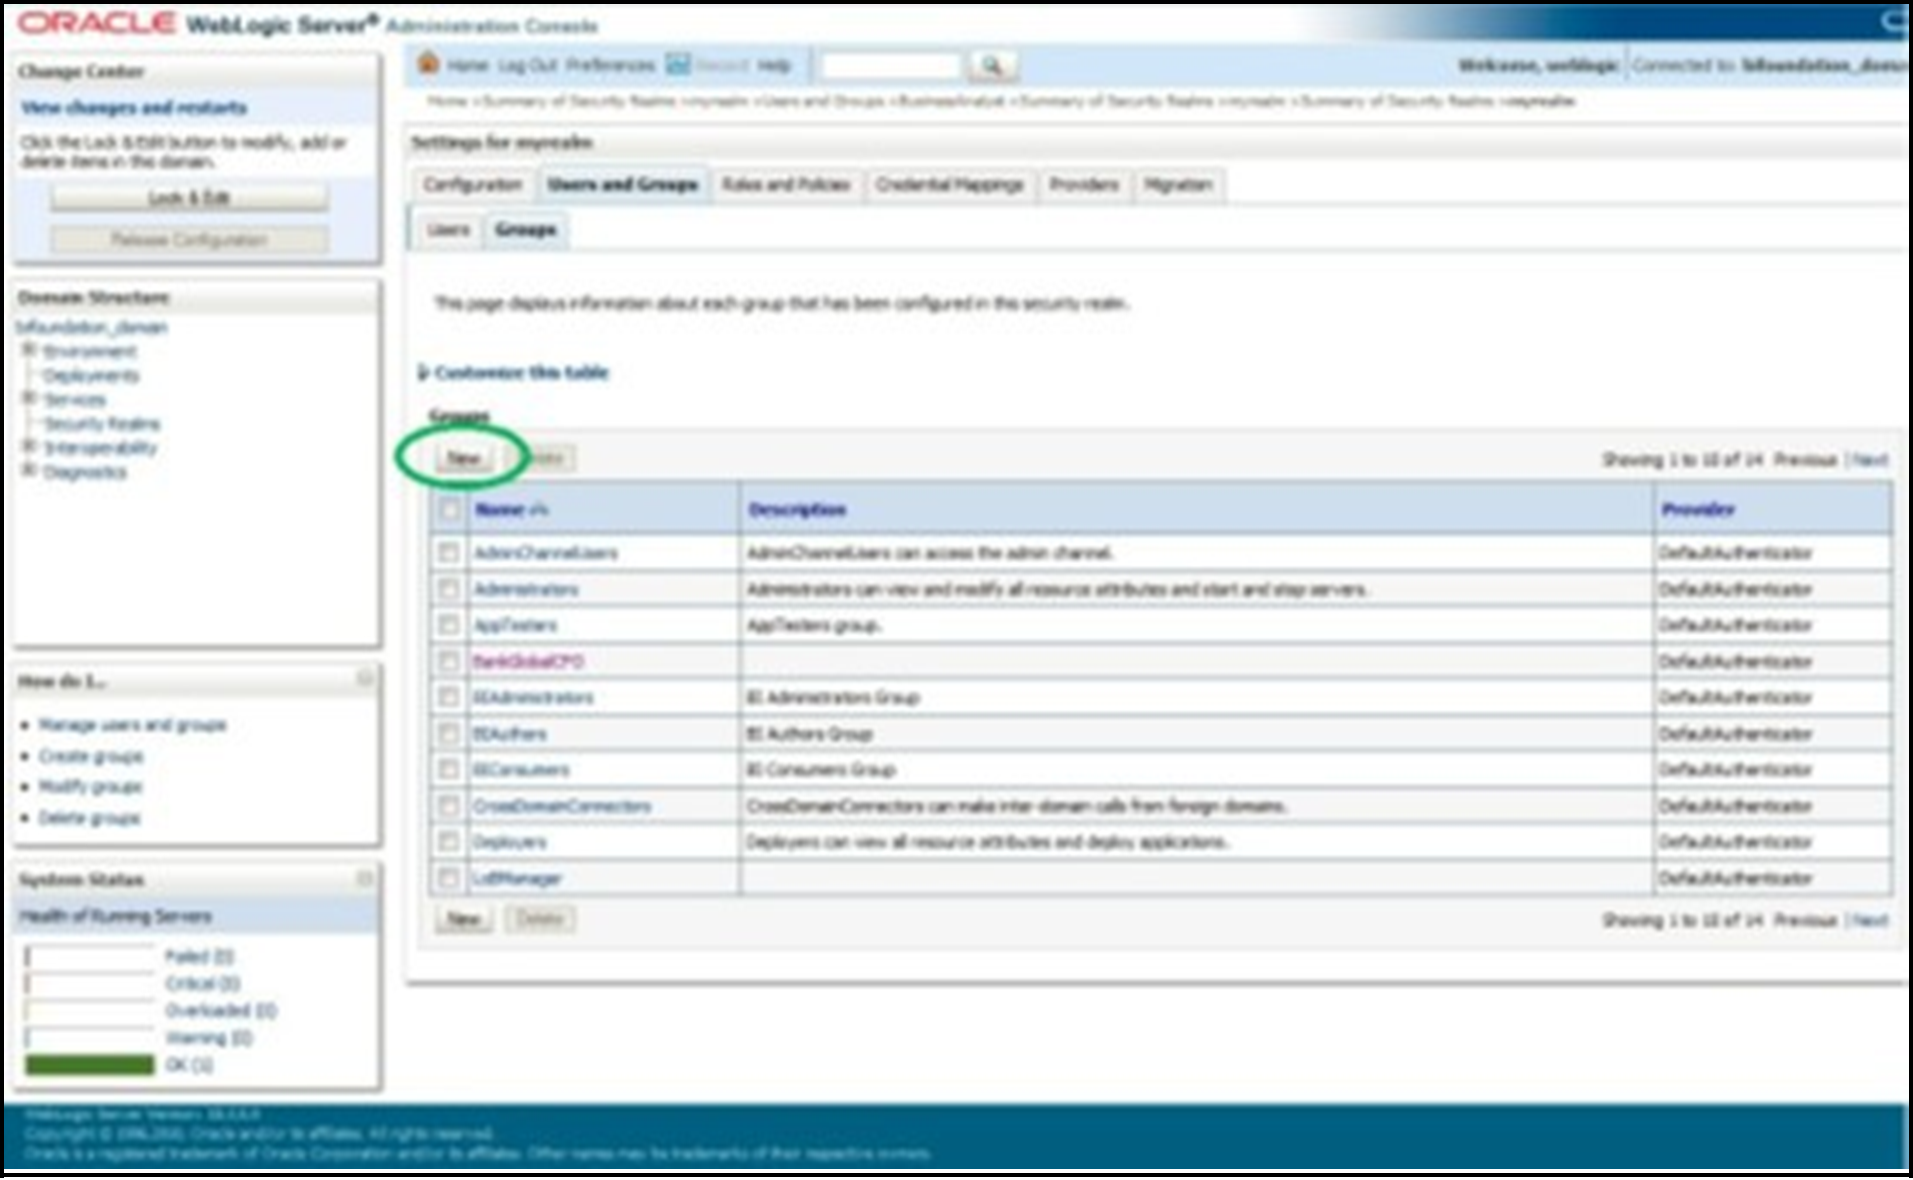 This screen of WebLogic Administrator Console allows you to create a new user goup.